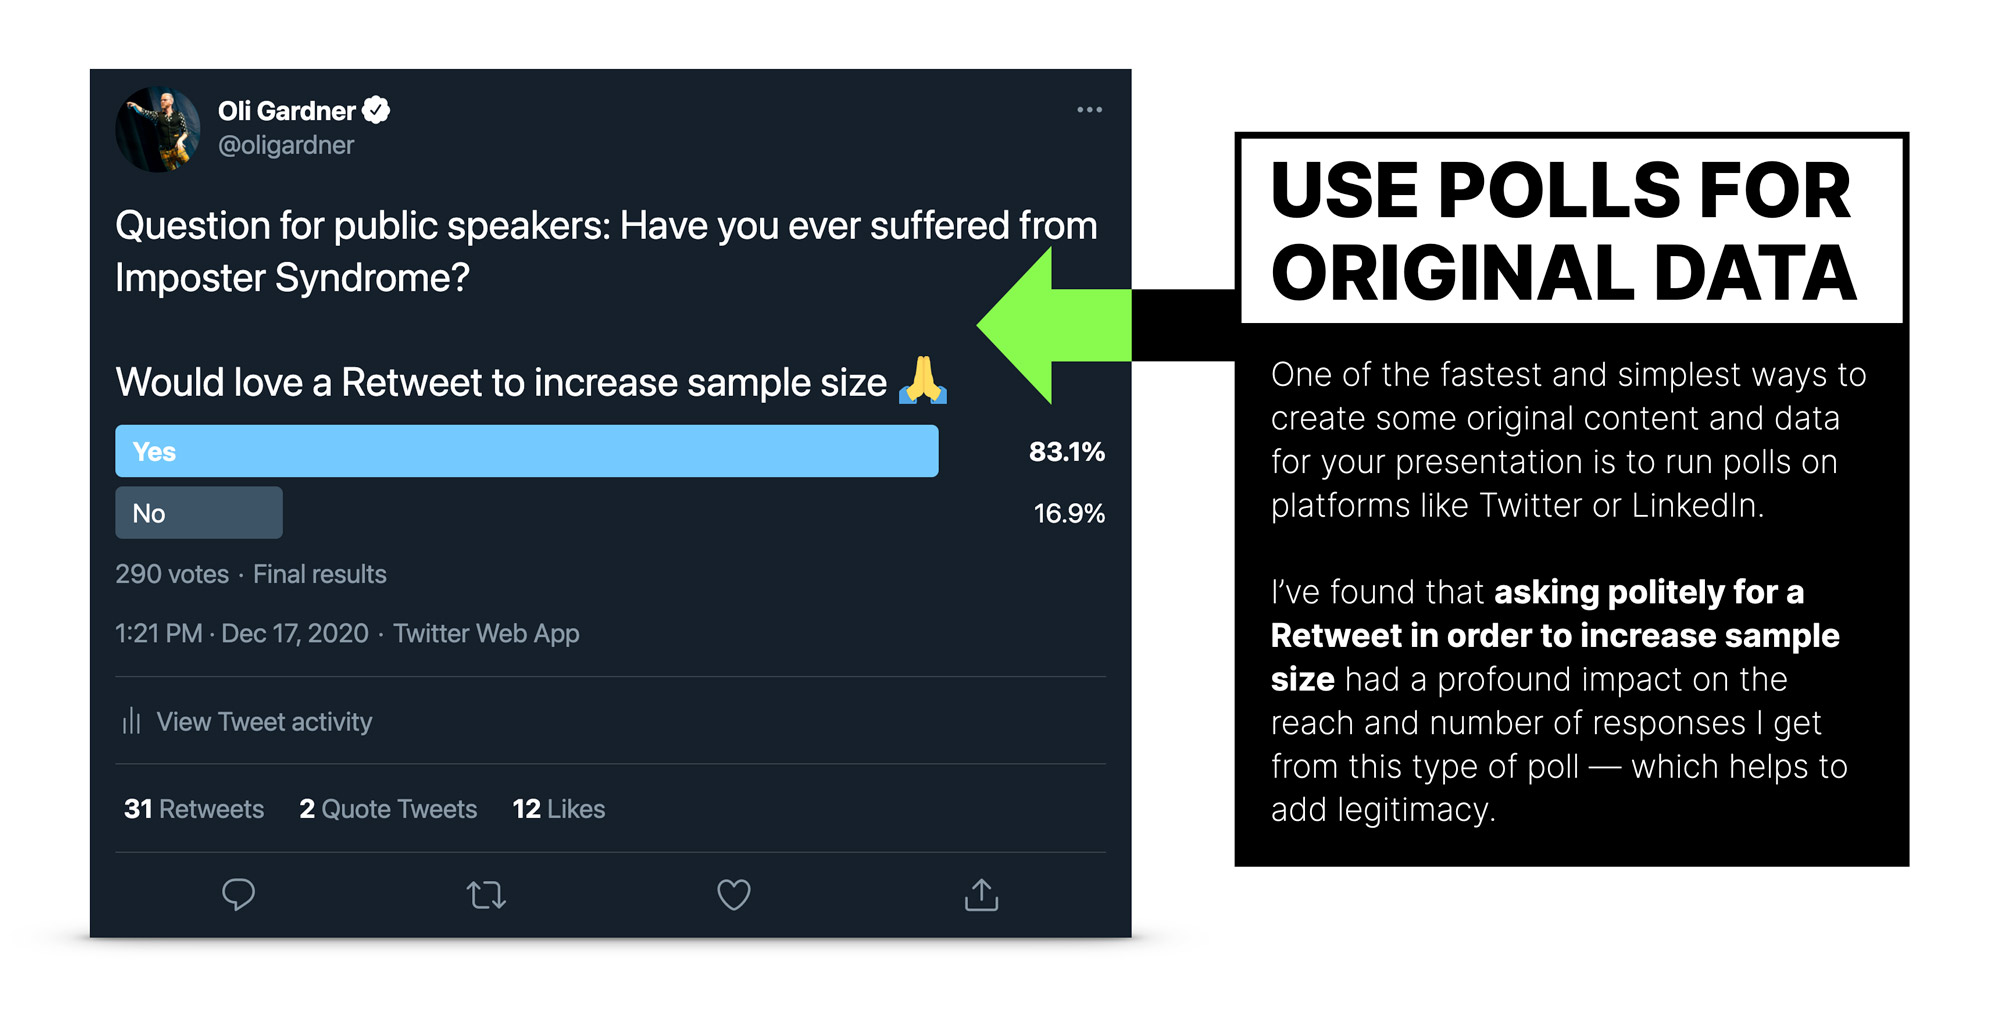 Use Twitter polls to create original cata and content for your presentations